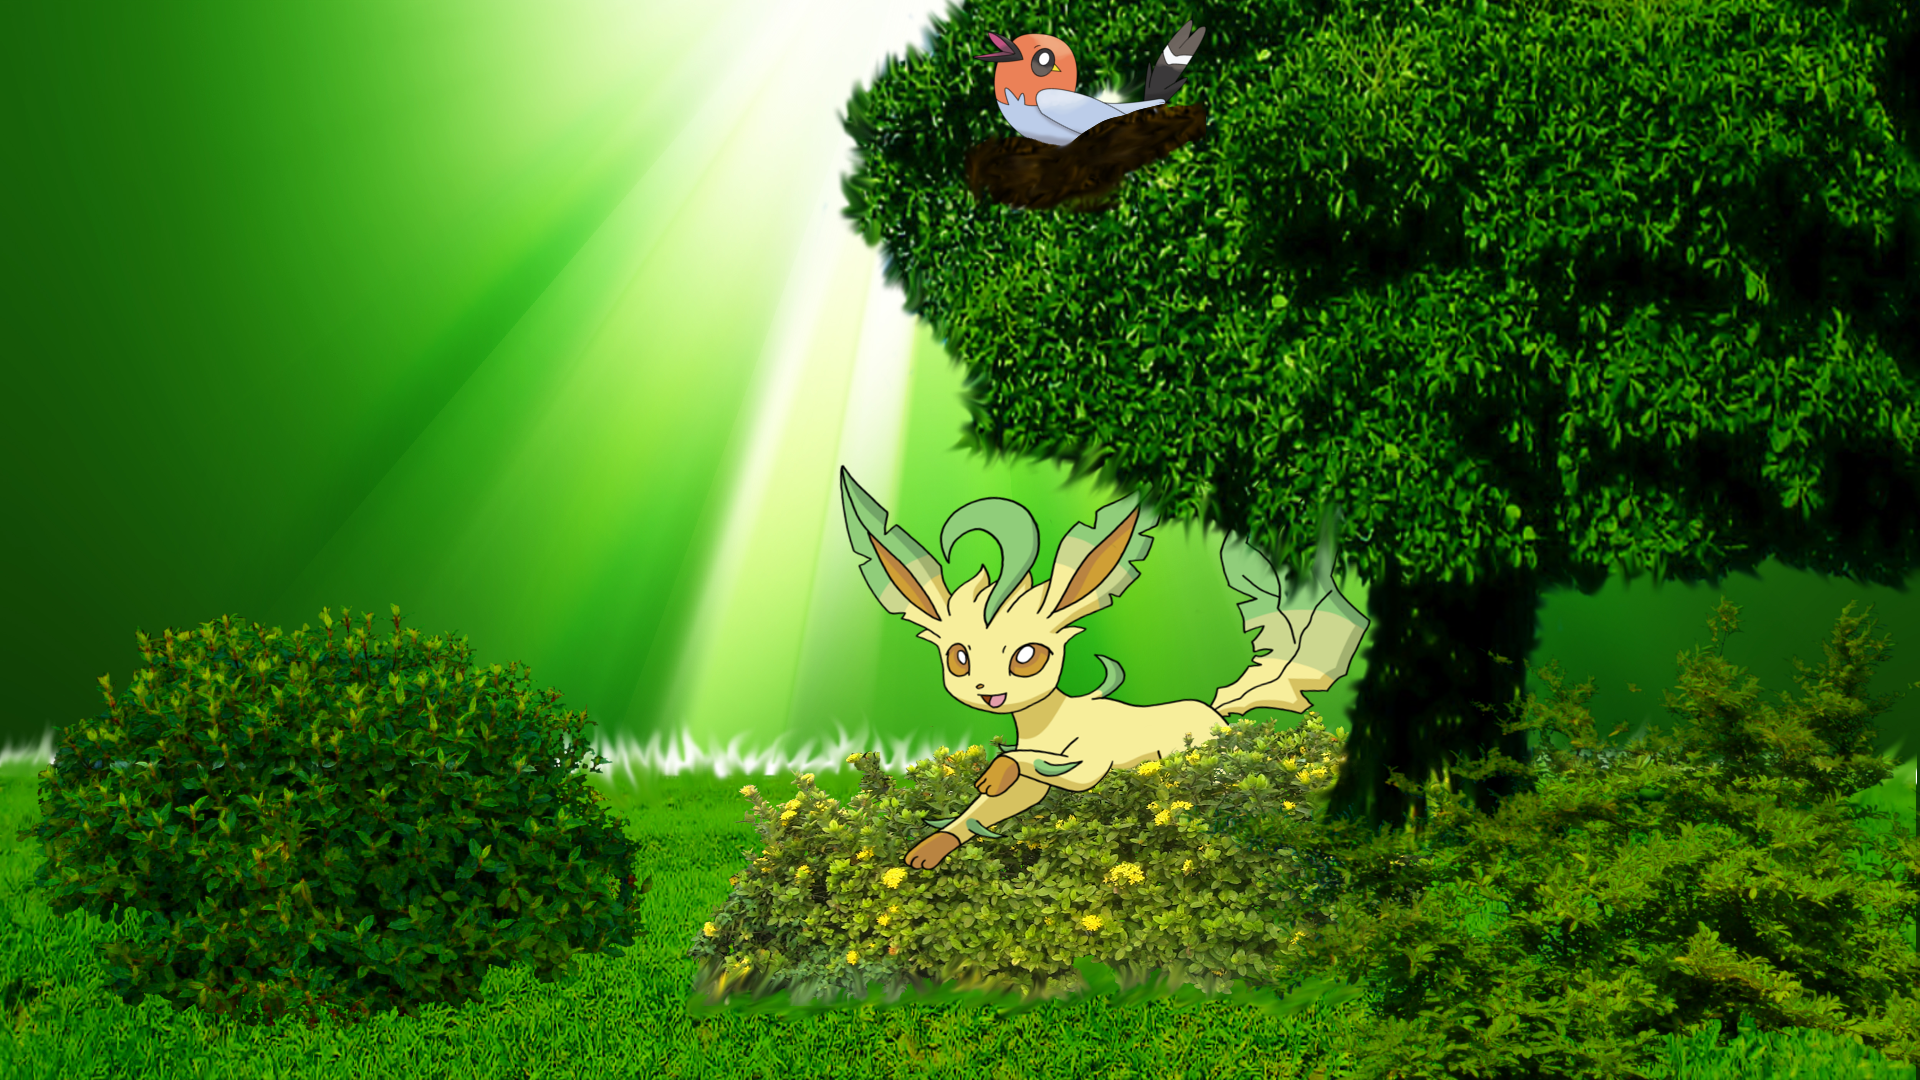 Leafeon Wallpapers